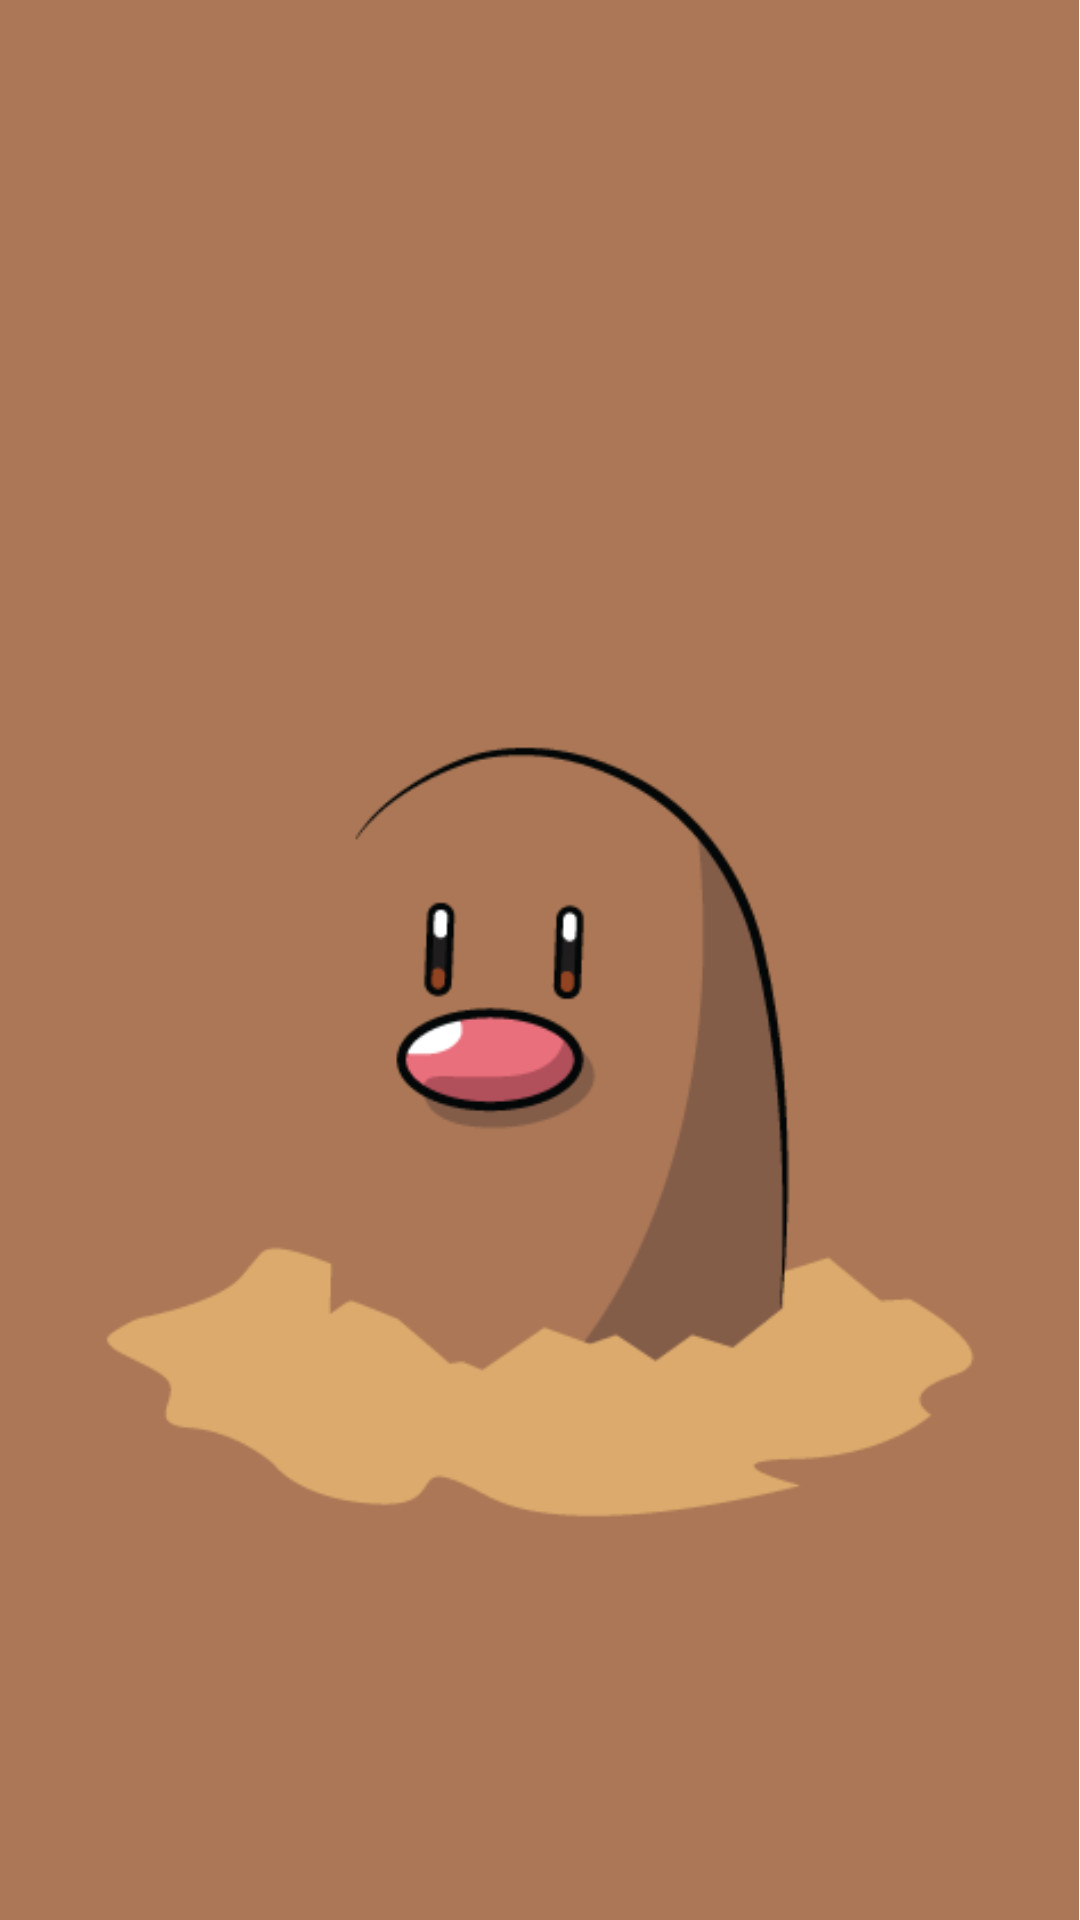 1080x1920 Diglett - Tap to see more Pokemon Go iPhone wallpaper! @mobile9